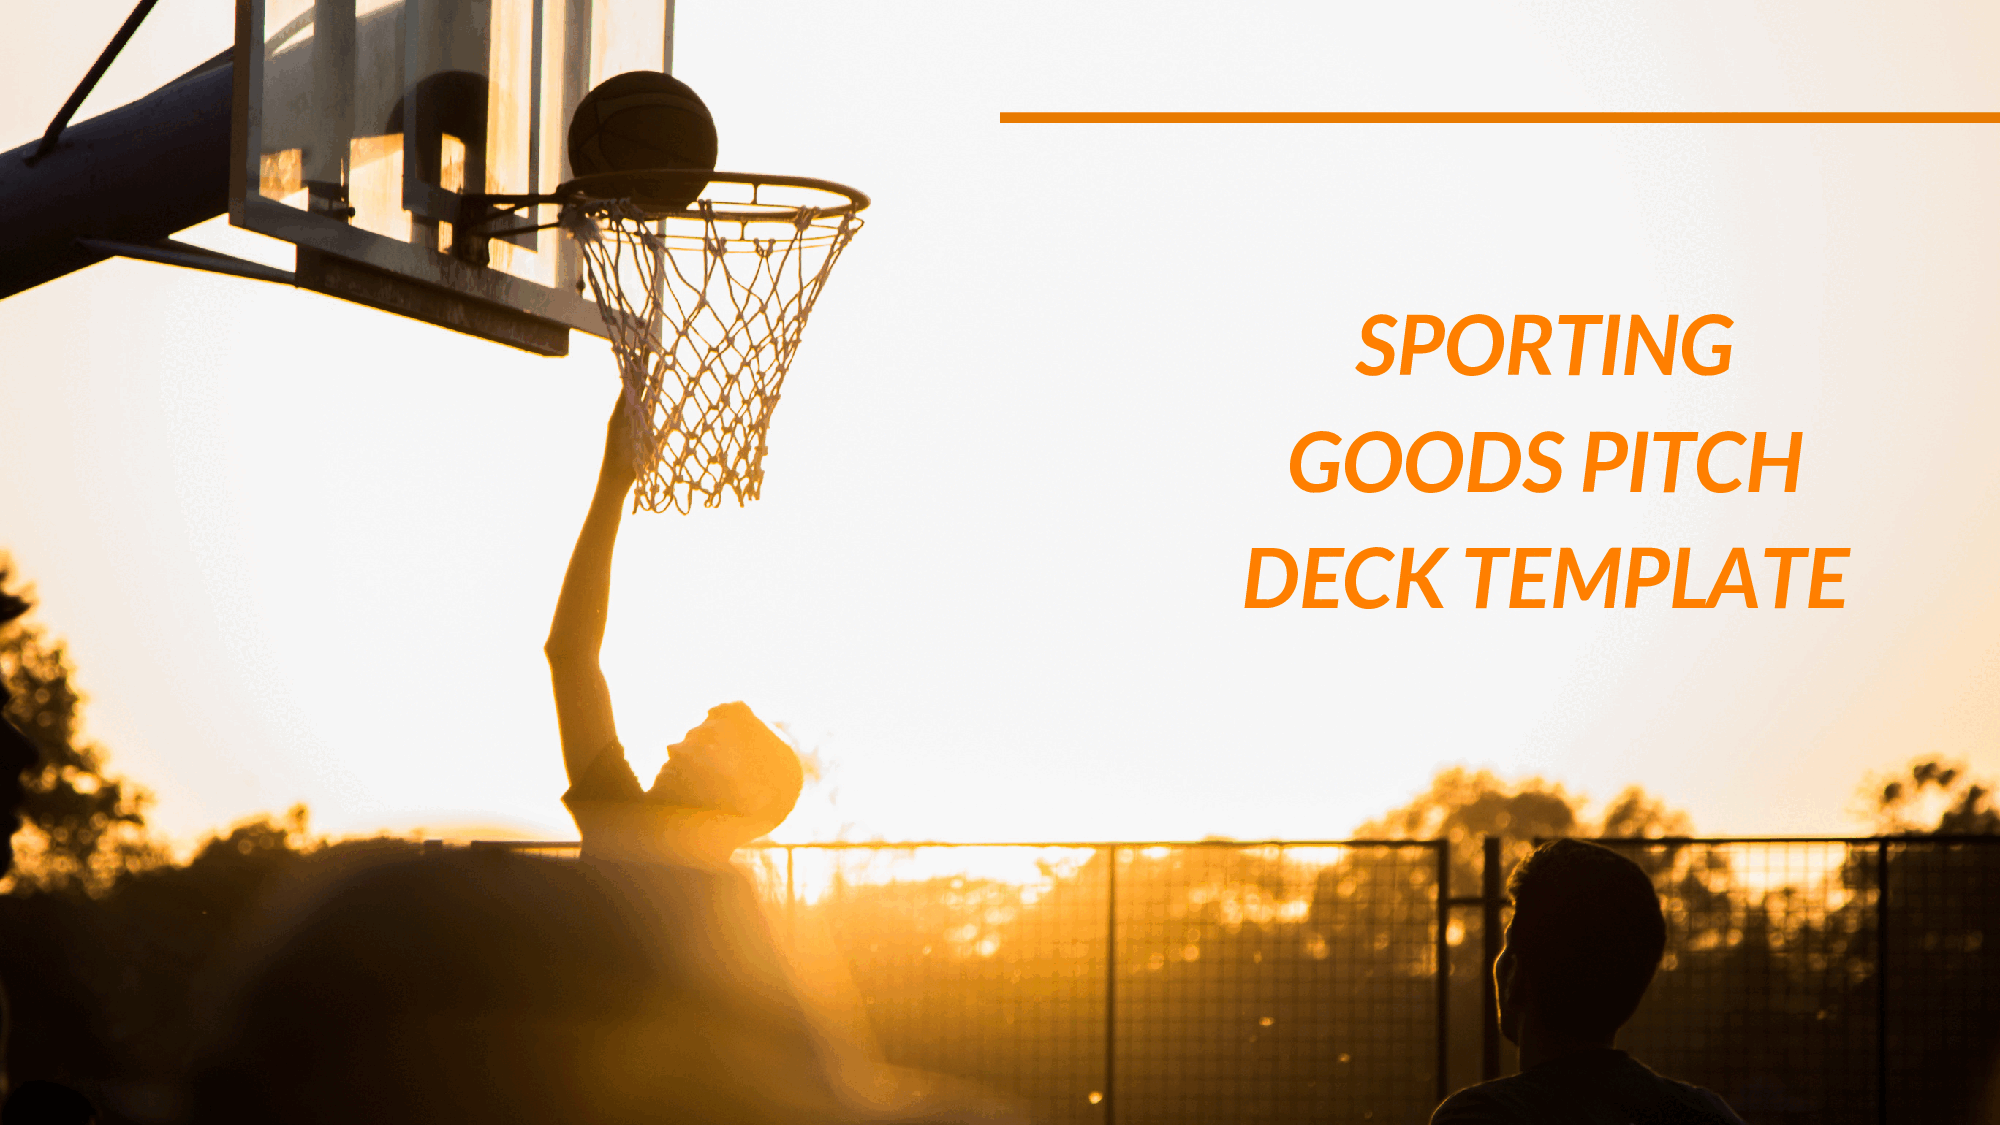 Sporting Goods Pitch Deck Template